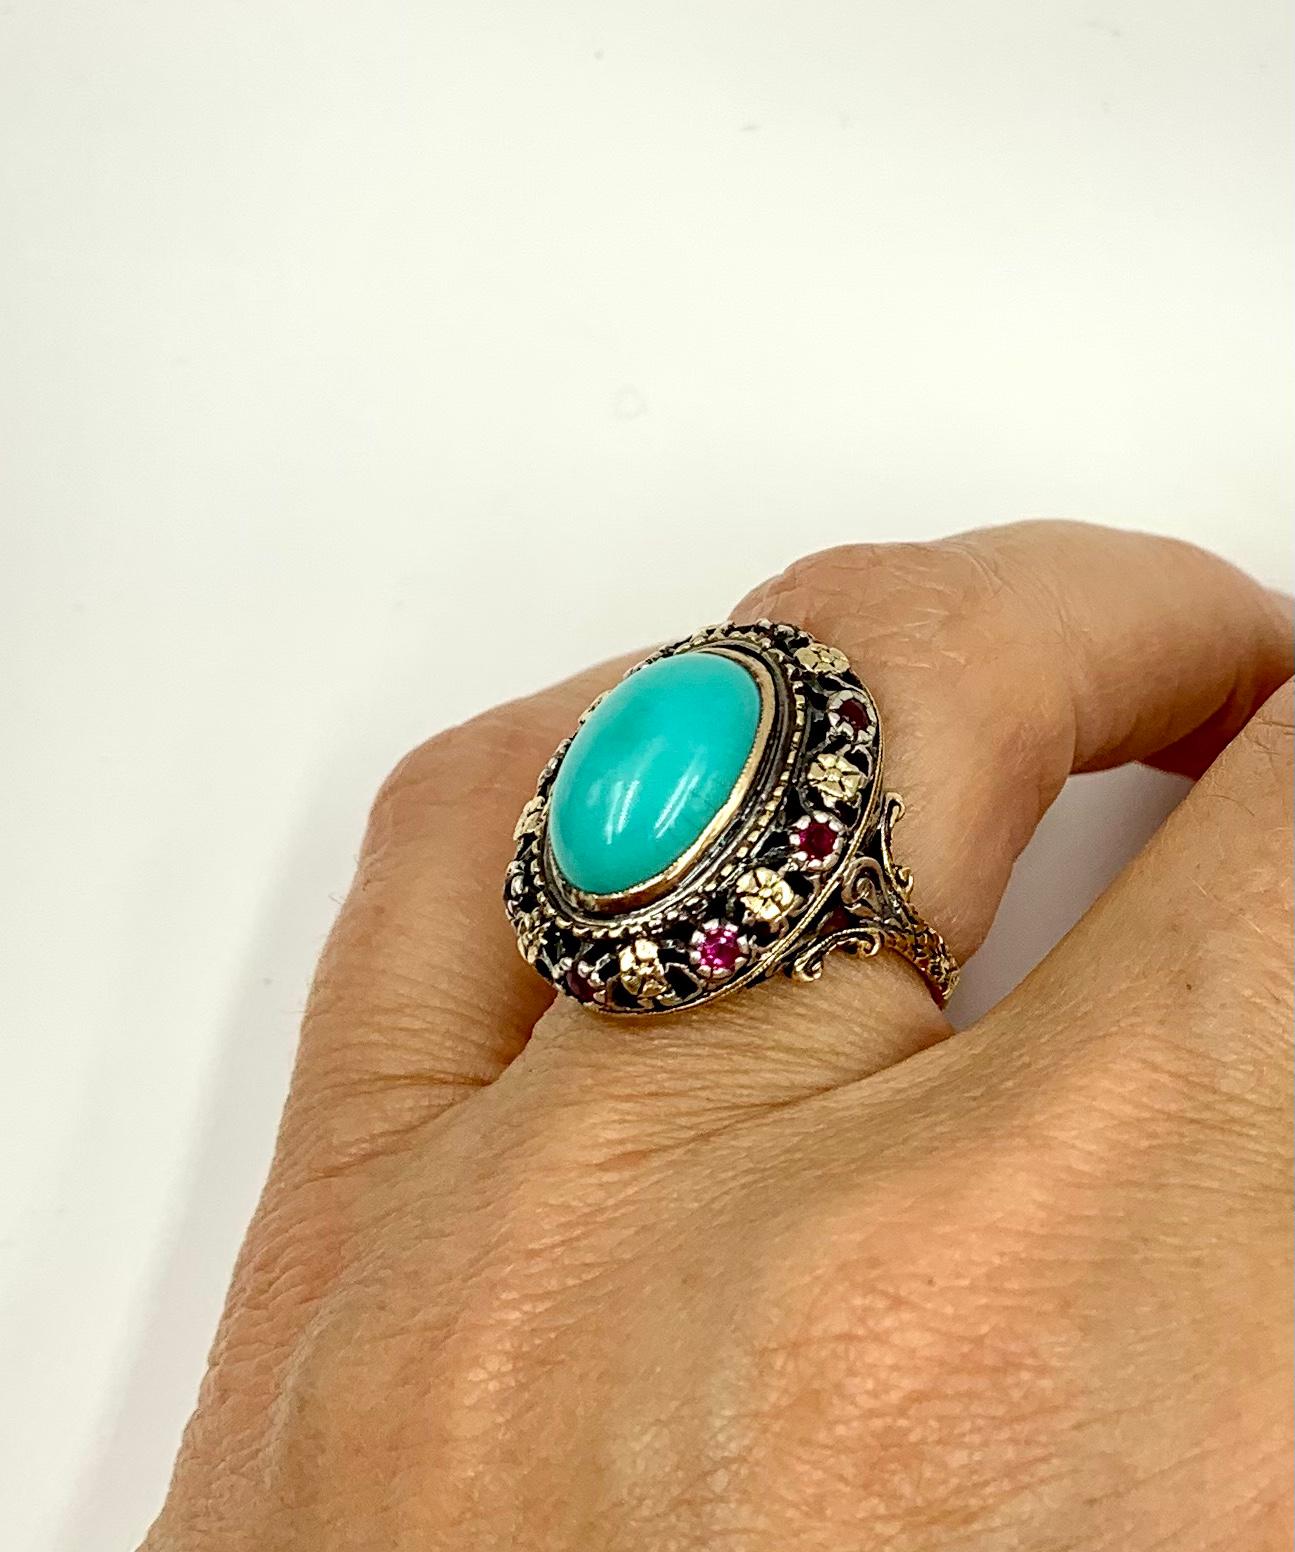 Antique Renaissance Style Turquoise, Ruby 18K Filigree Gold Ring, 19th Century For Sale 4